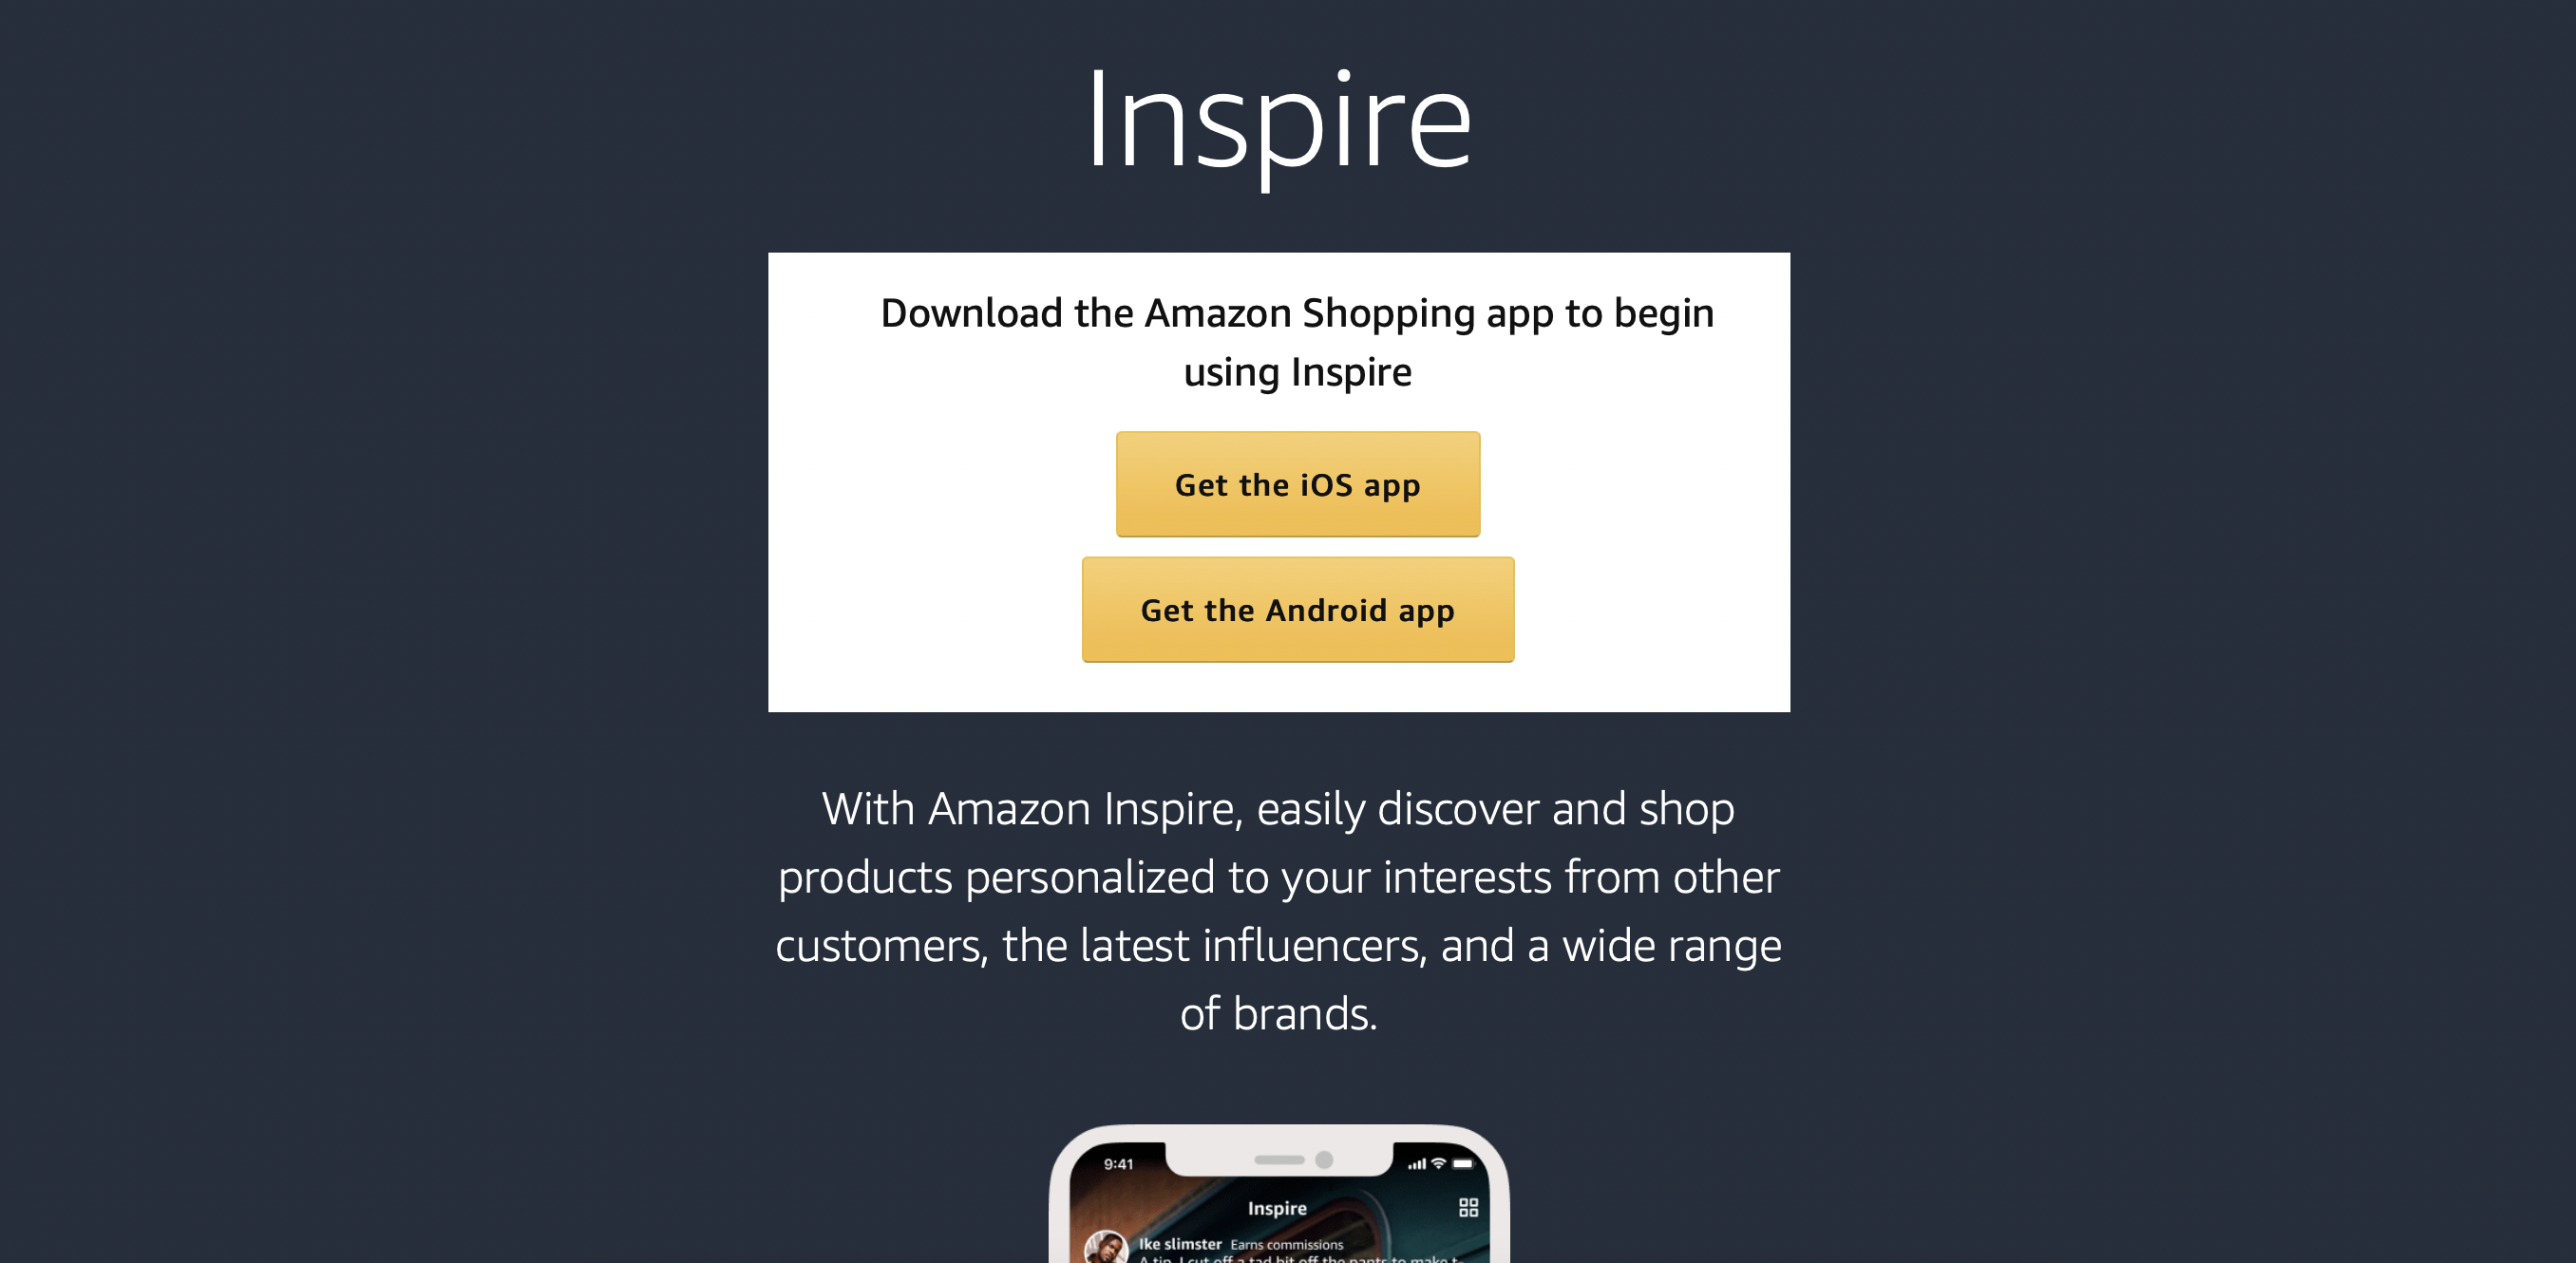 What is Amazon Inspire & how can it help you?